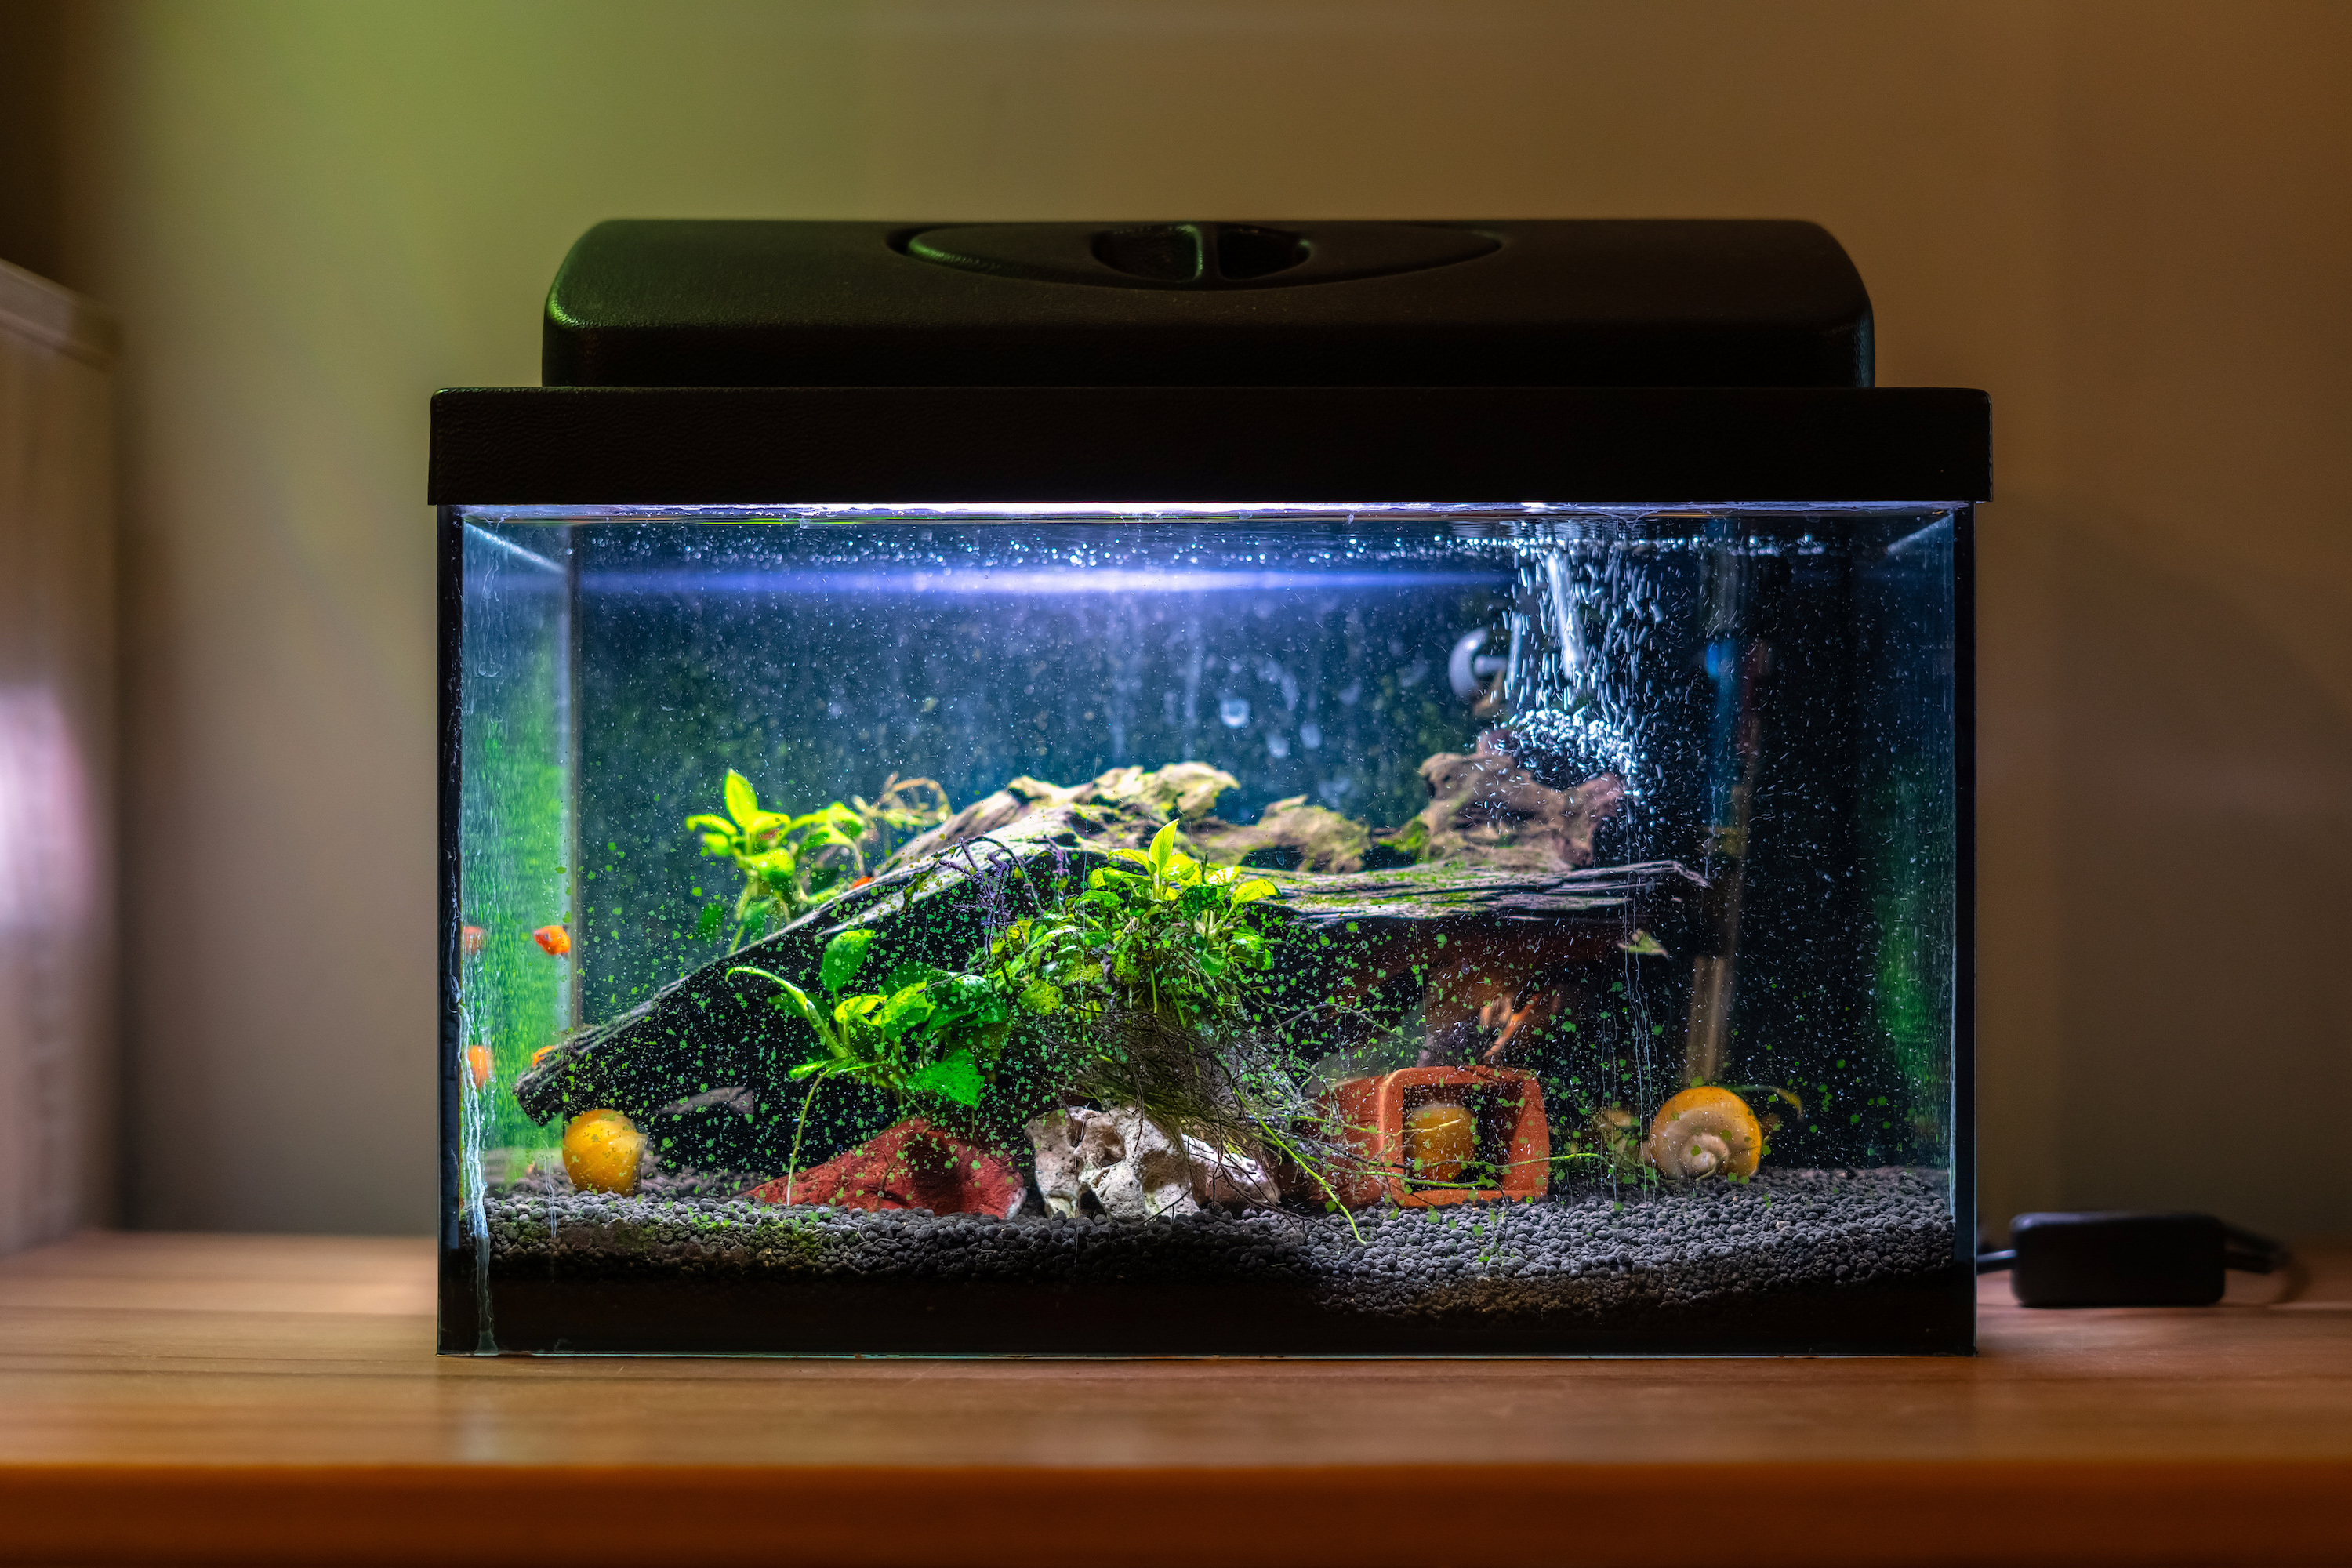 What Do The Bubbles In Your Fish Tank Mean? | Pawtracks